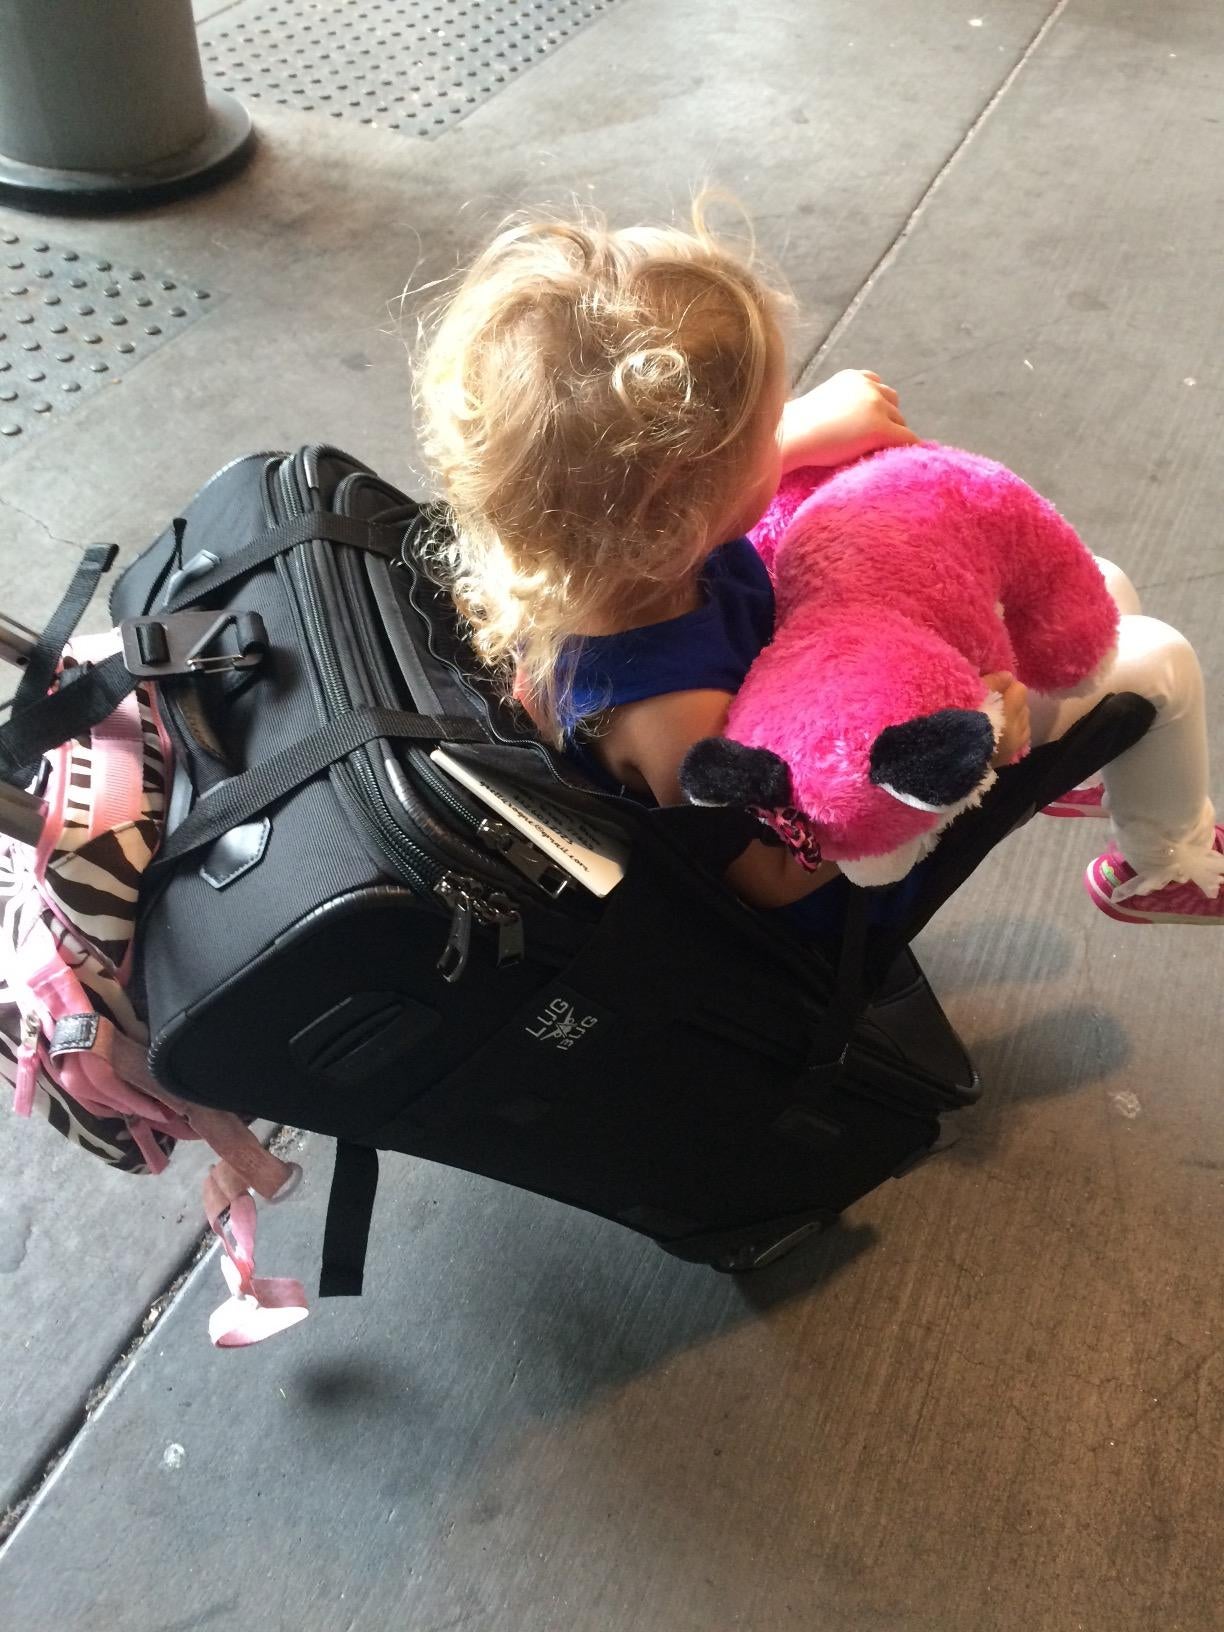 Summer Travel Gear Guide: 12 Items You Need for Travel with Kids